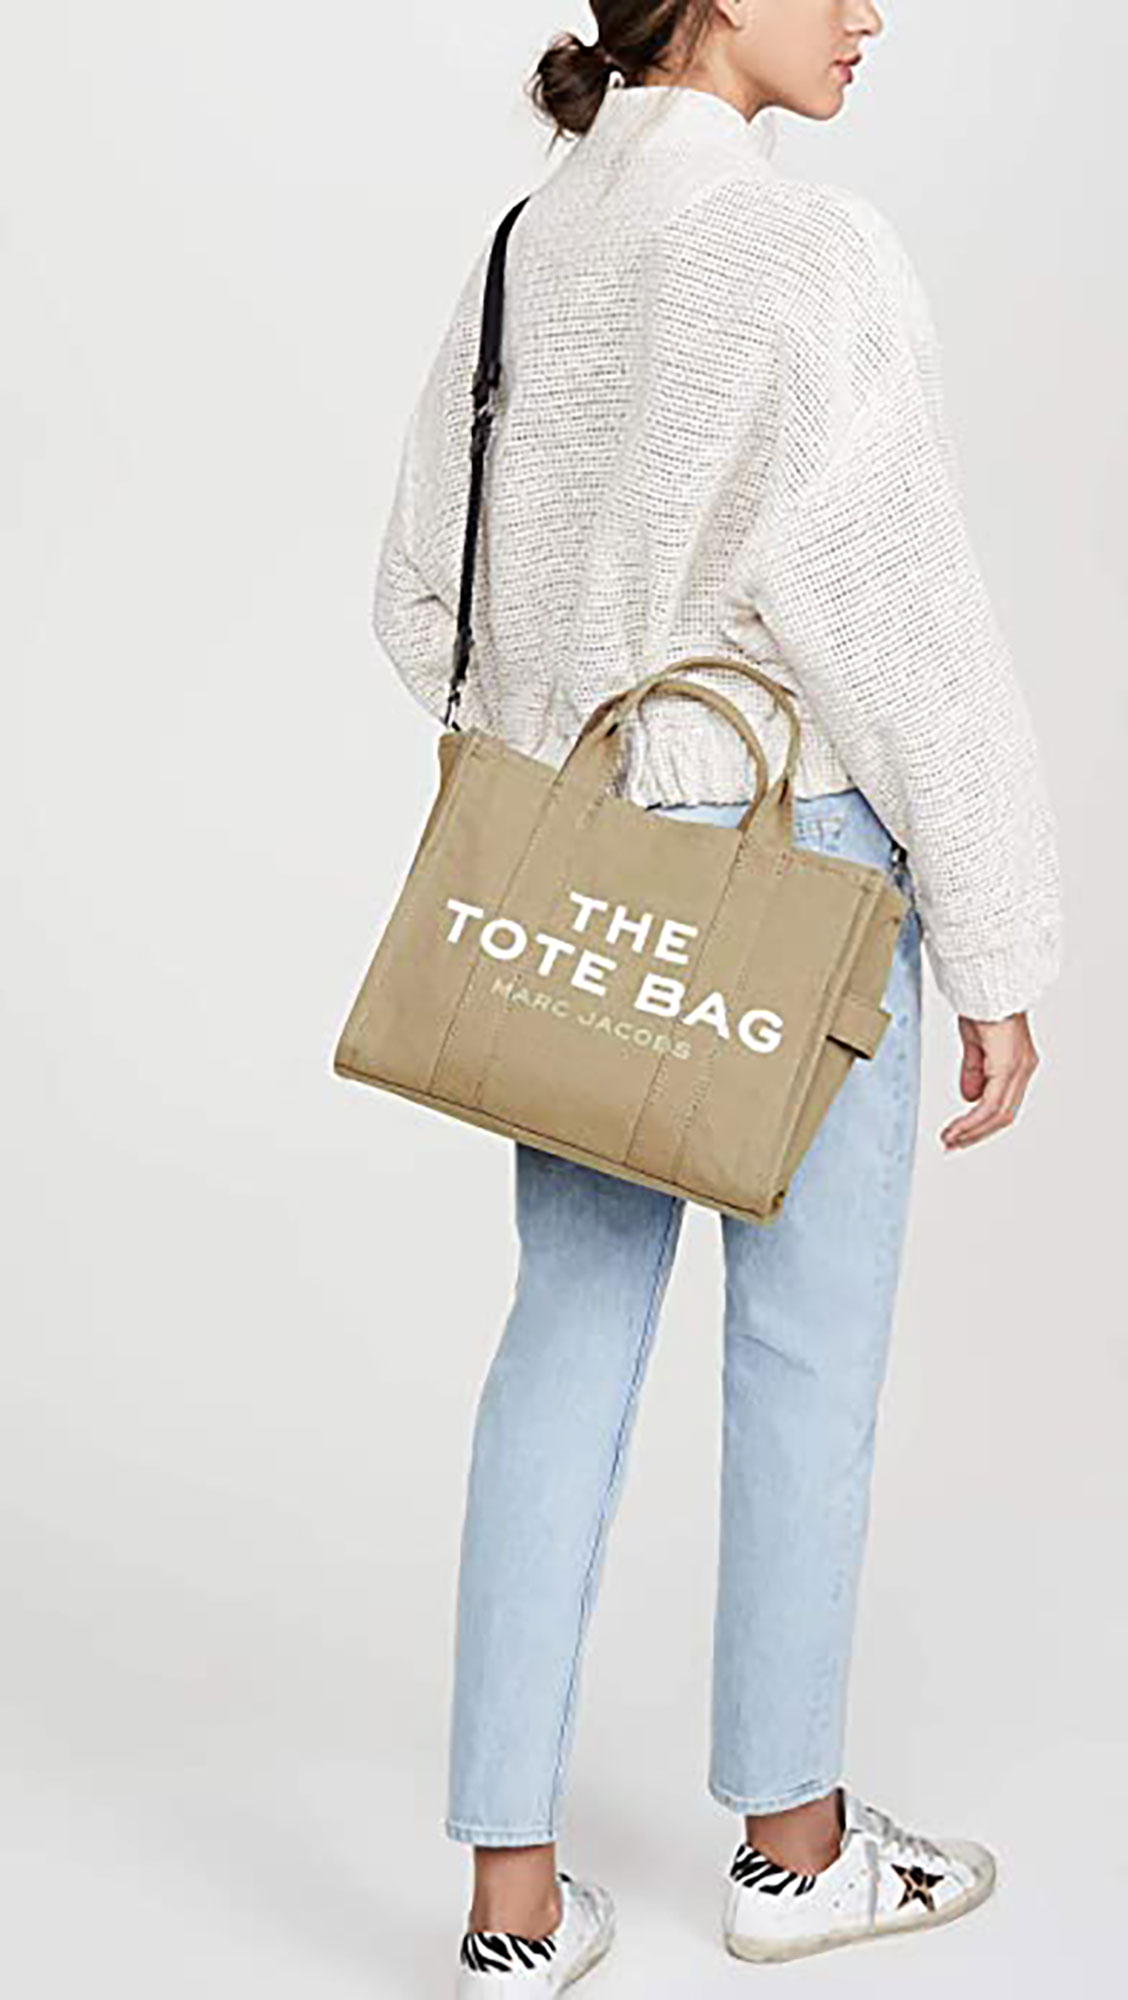 8 Stylish Tote Bags for Your Daily Needs | Elle Canada